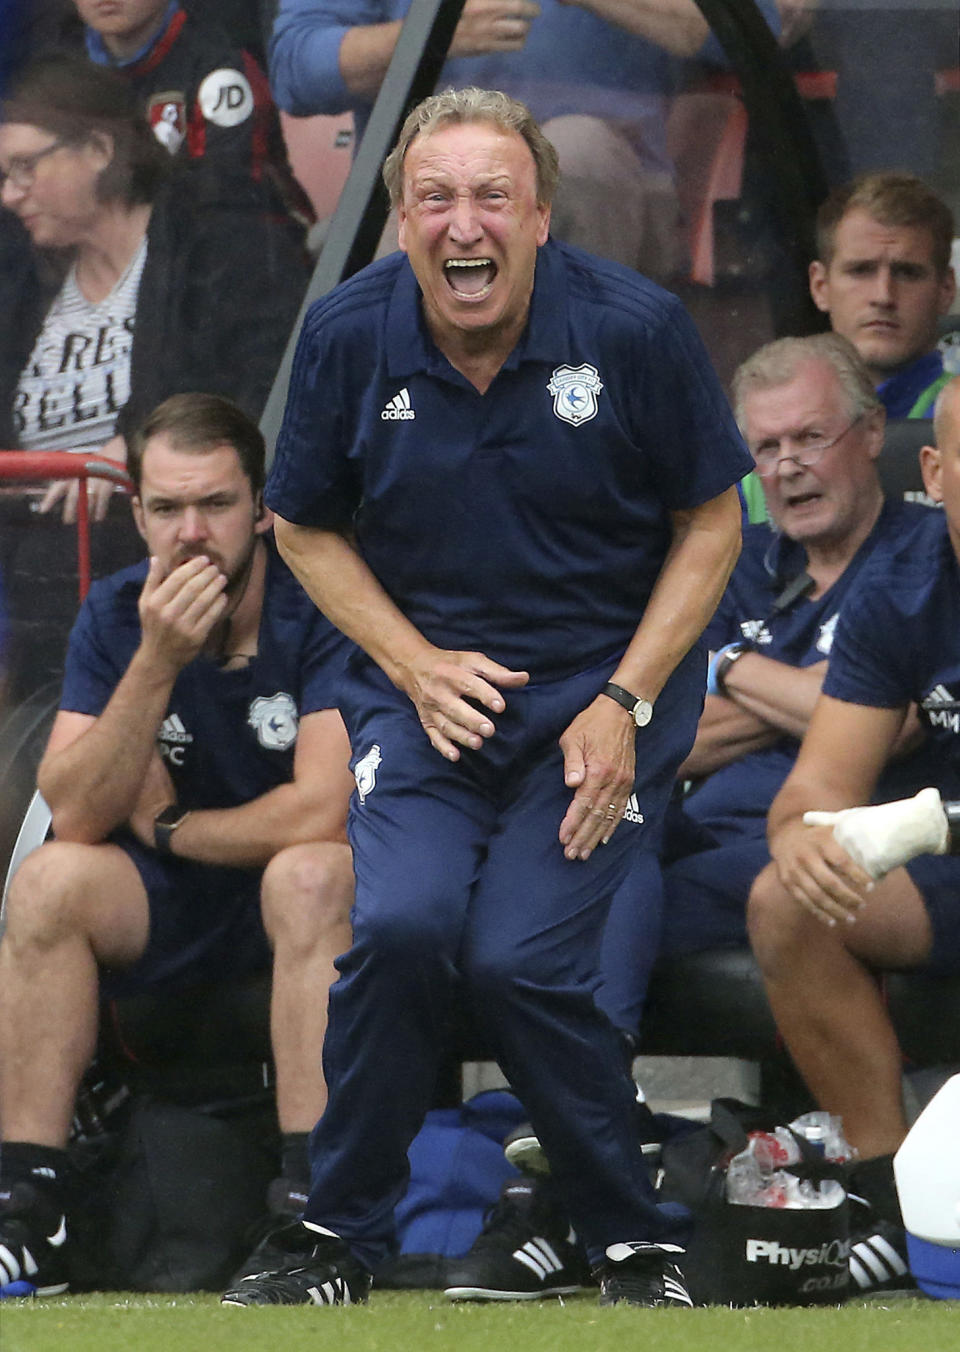 Cardiff City manager Neil Warnock on the touchline during the match against Bournemouth during their English Premier League soccer match at the Vitality Stadium in Bournemouth, England, Saturday Aug. 11, 2018. (Mark Kerton/PA via AP)